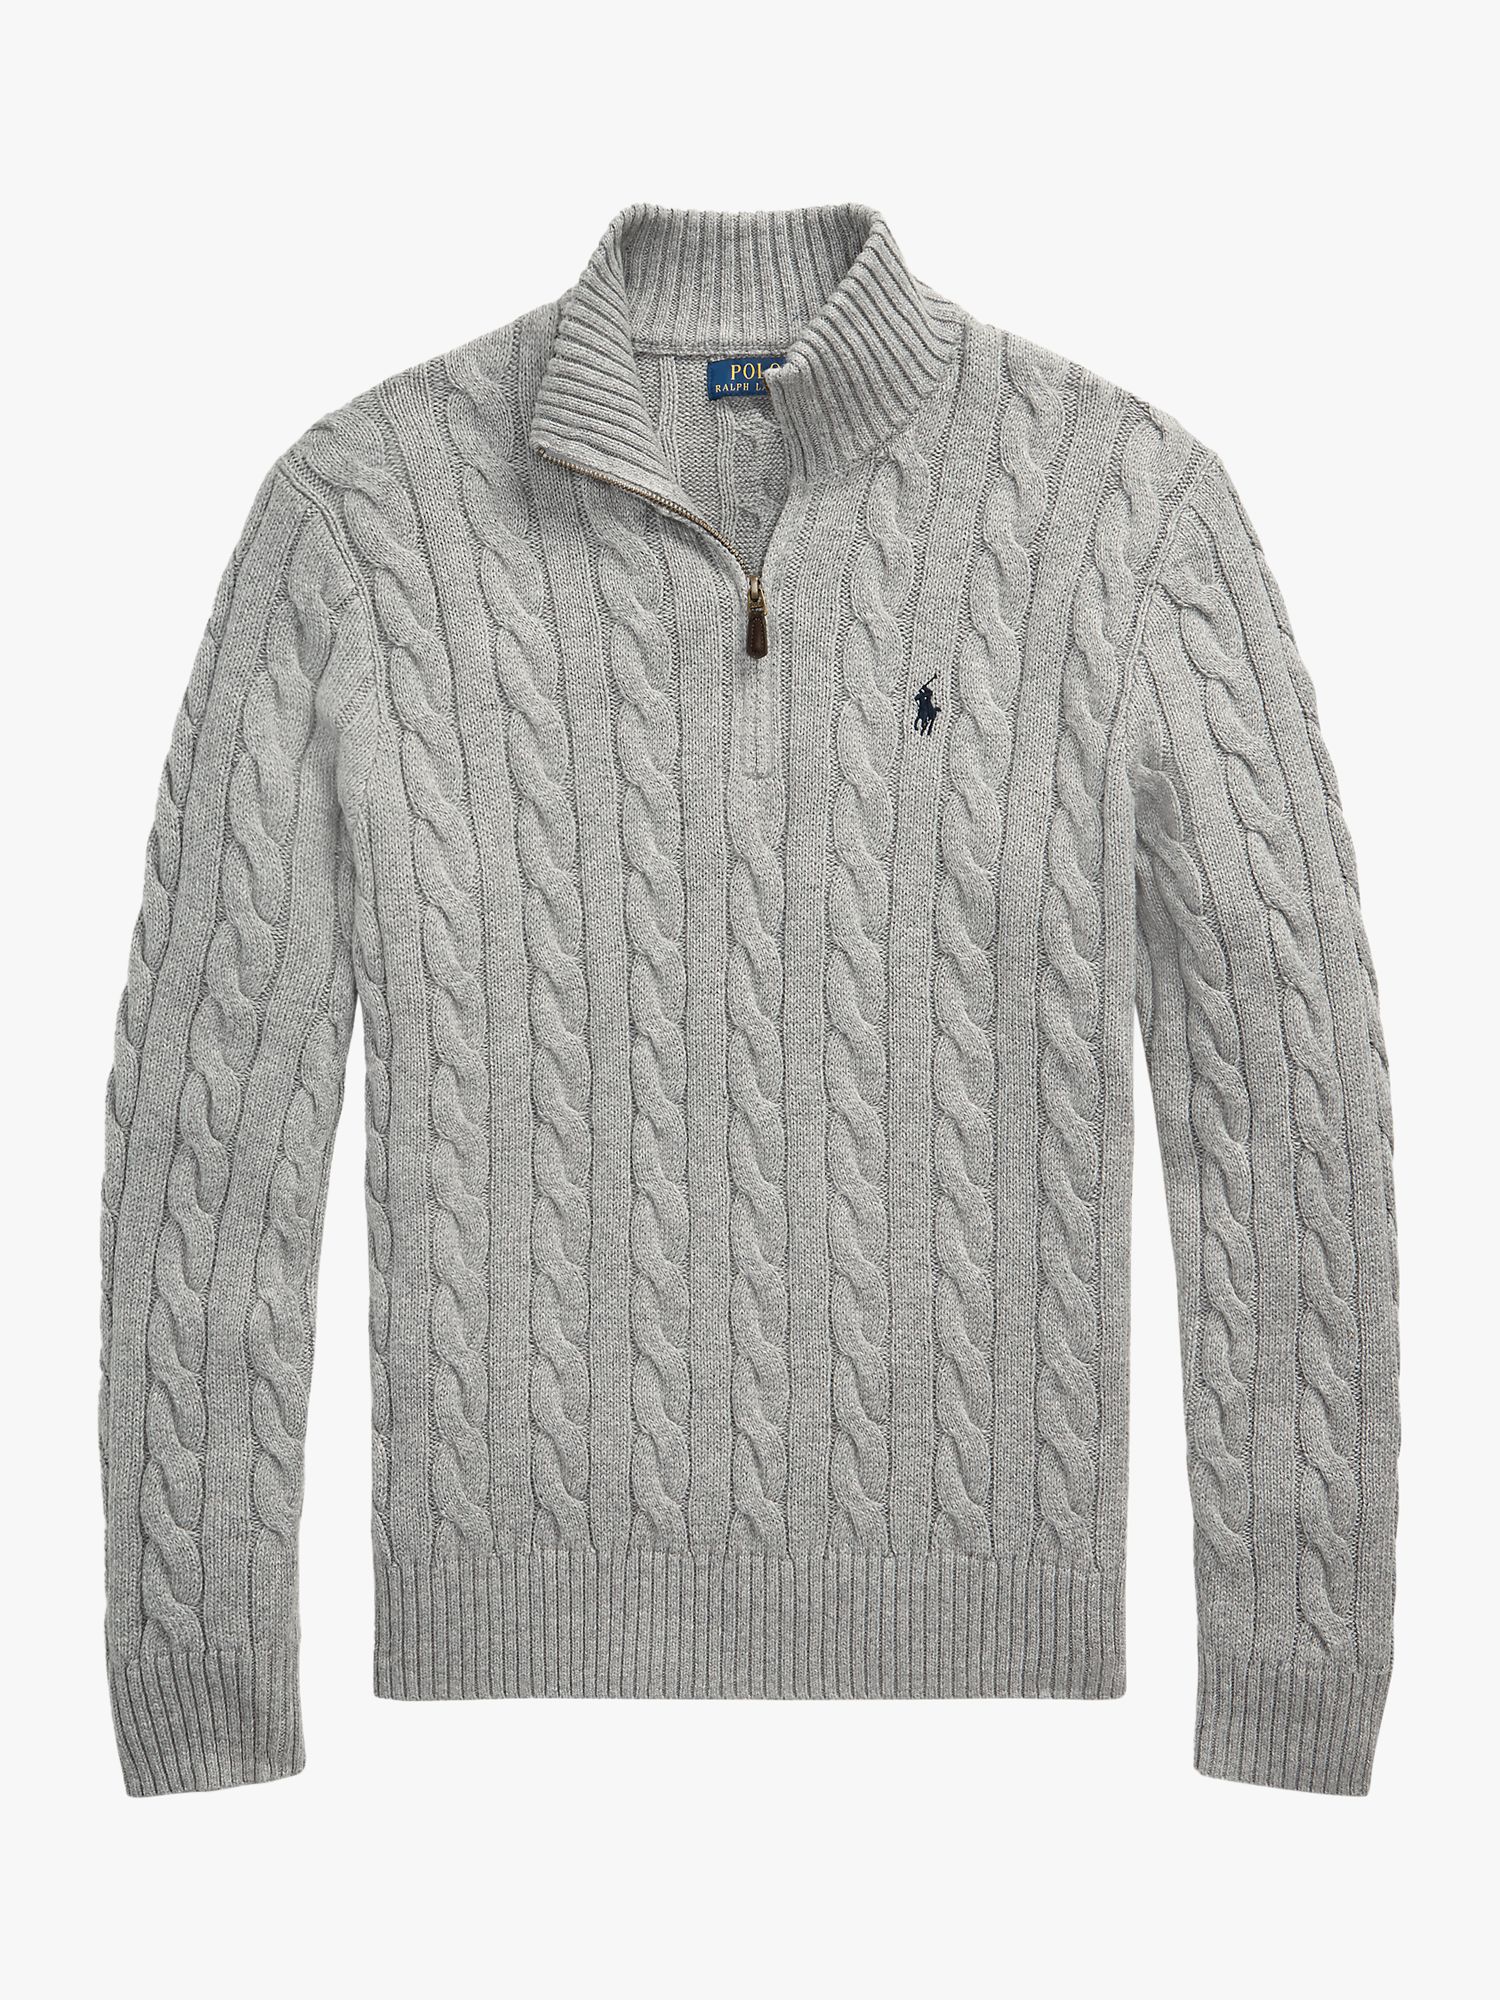 Polo Ralph Lauren Cotton Cable Knit Half Zip Jumper, Fawn Grey Heather